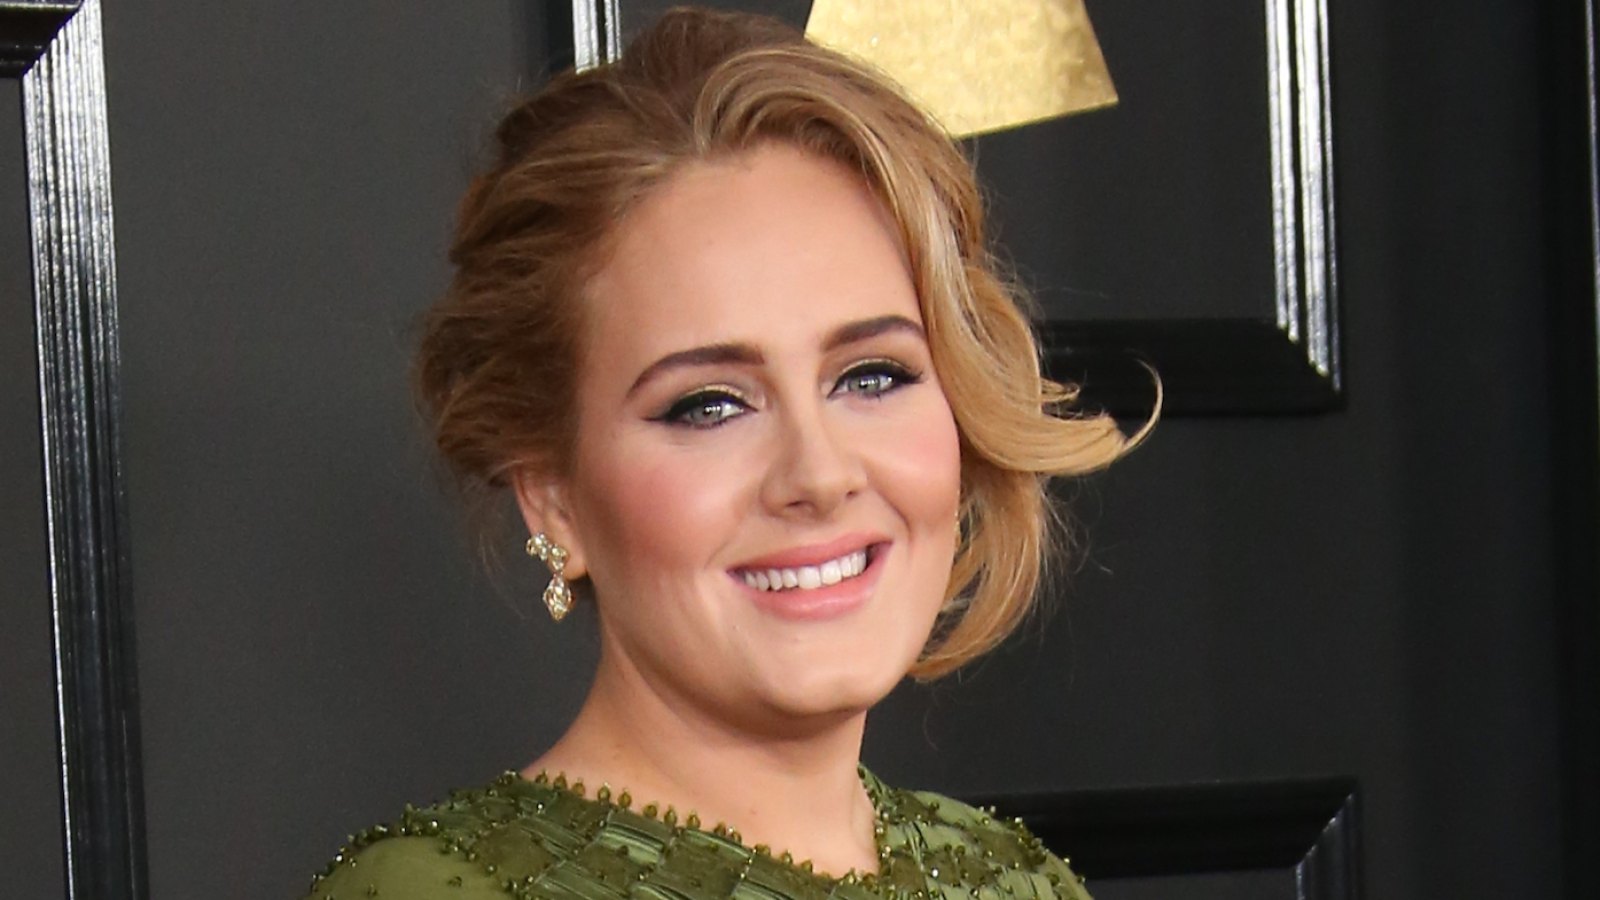 Adele Celebrates Turning 31 Amid Divorce: Life Is ‘Complicated at Times’